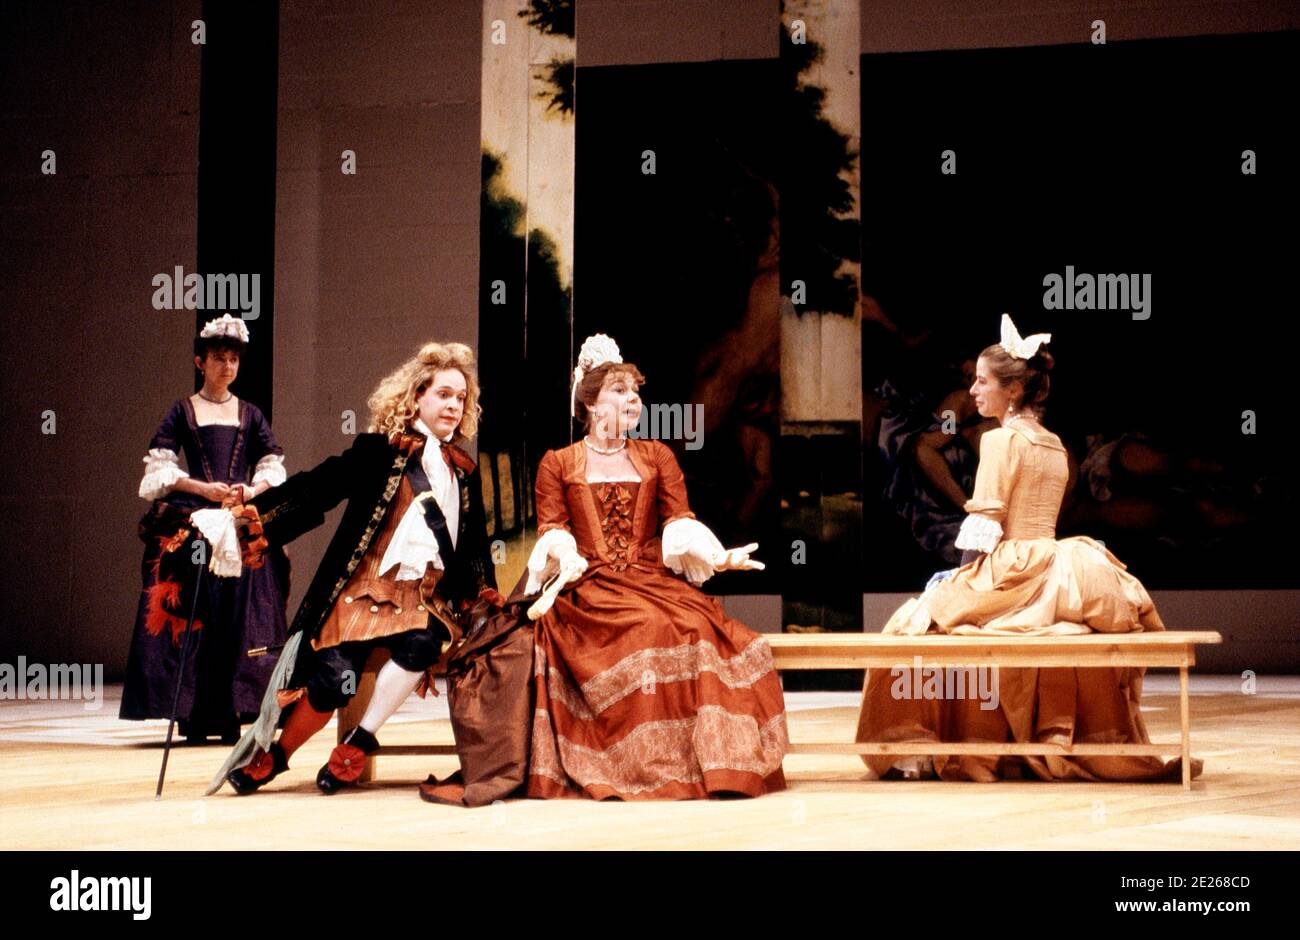 l-r: Katy Murphy (Mincing), Tom Hollander (Witwoud), Barbara Flynn (Millament), Emma Piper (Mrs Fainall) in THE WAY OF THE WORLD by Congreve at the Lyric Theatre Hammersmith, London W6  20/10/1992  set design: Tom Piper  costumes: Moggie Douglas  lighting: Steven Wentworth  director: Peter Gill Stock Photo